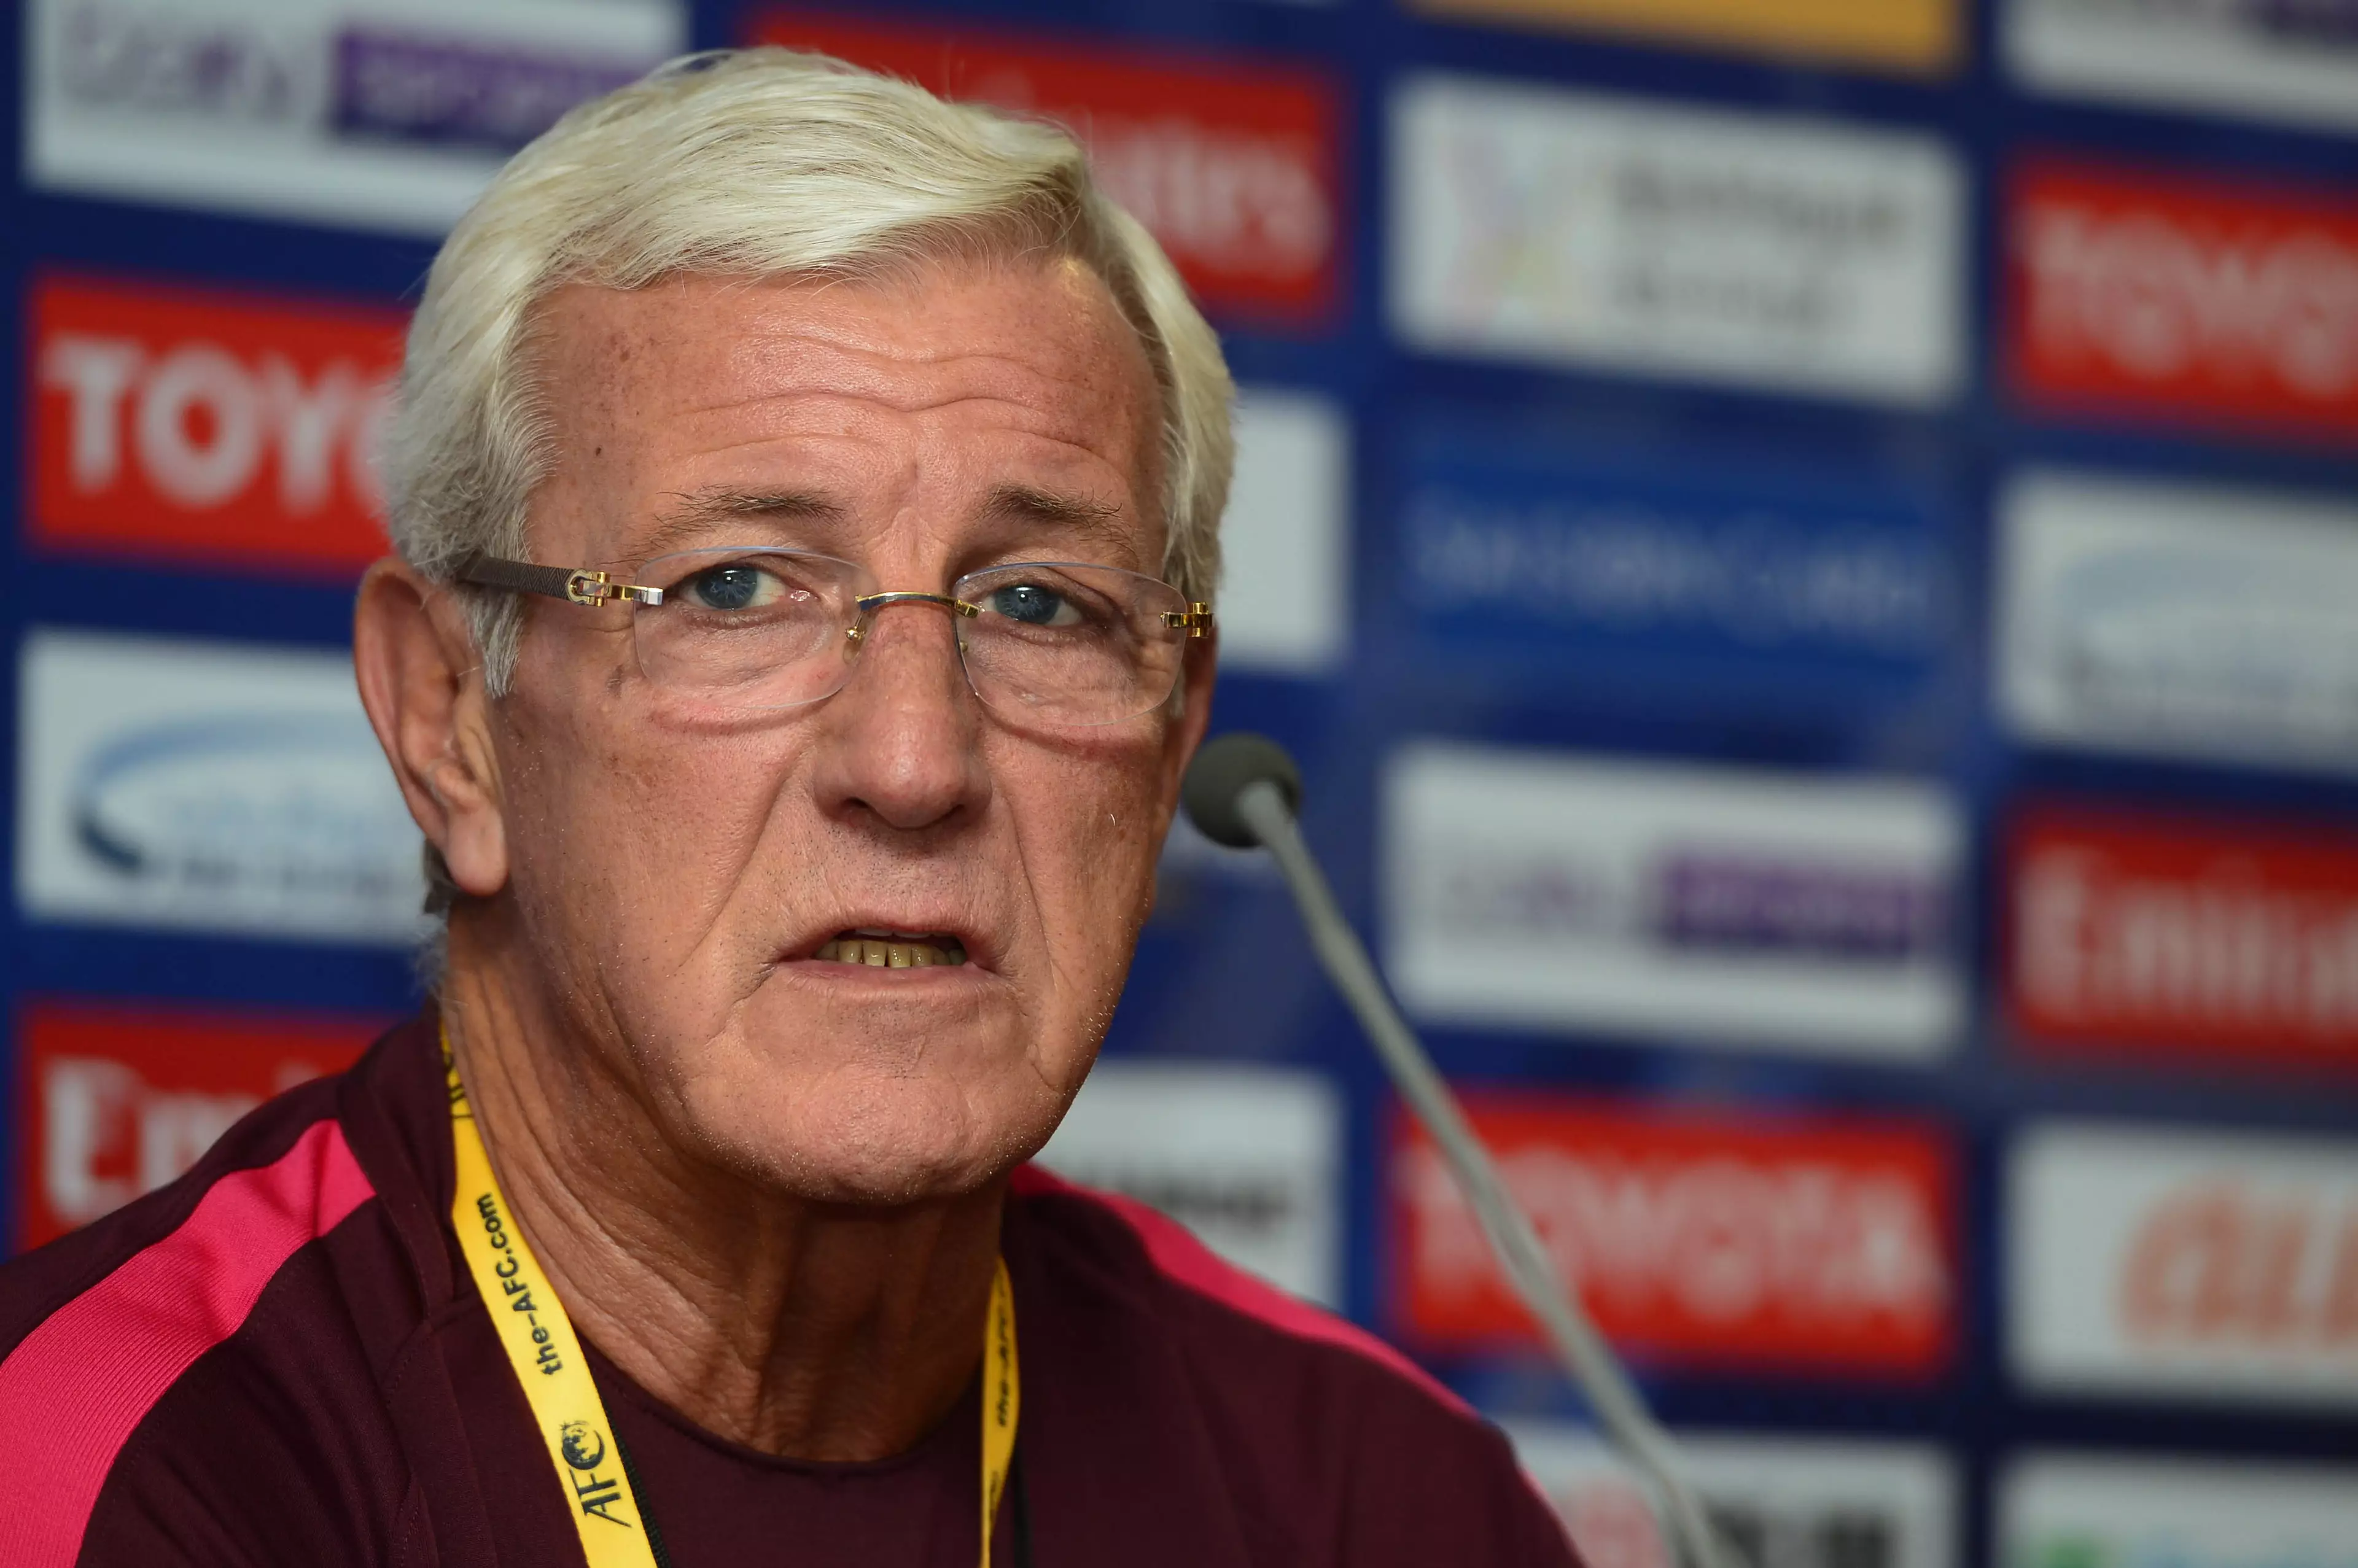 Lippi will be hoping to take China to the 2022 World Cup. Image: PA Images.